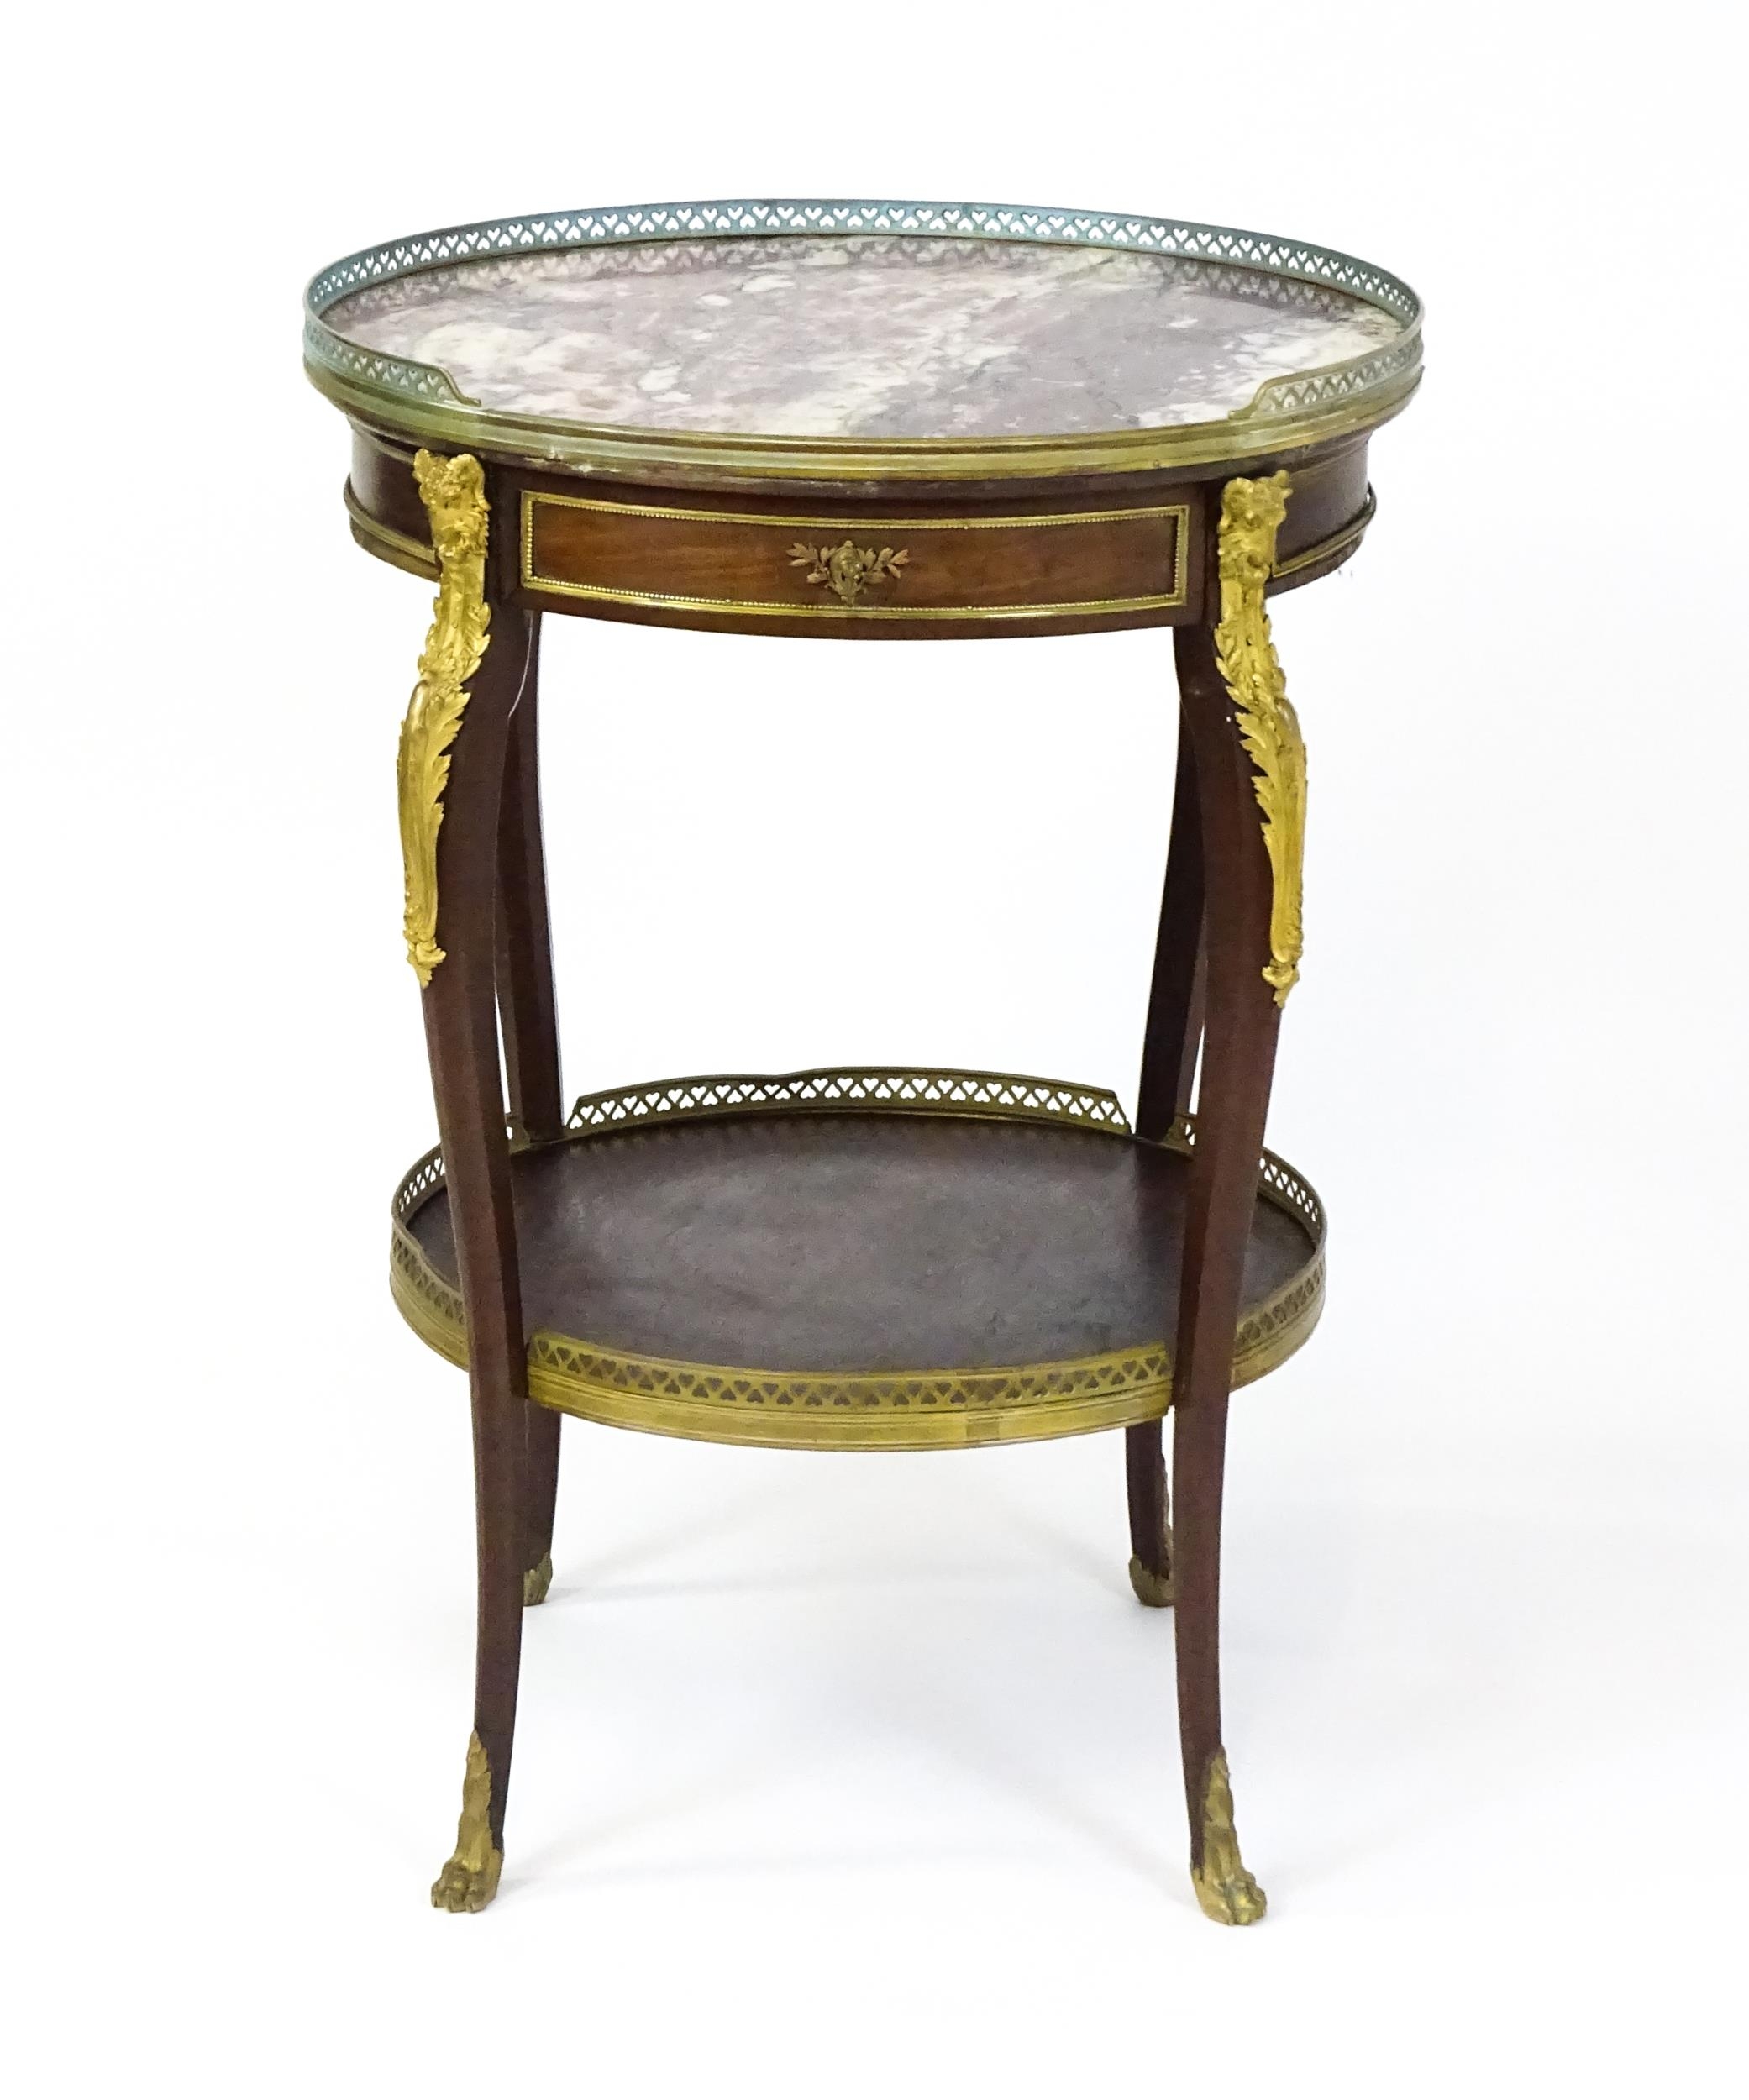 A 19thC rosewood and marble topped side table surmounted by a pierced surround and having a single - Image 3 of 10